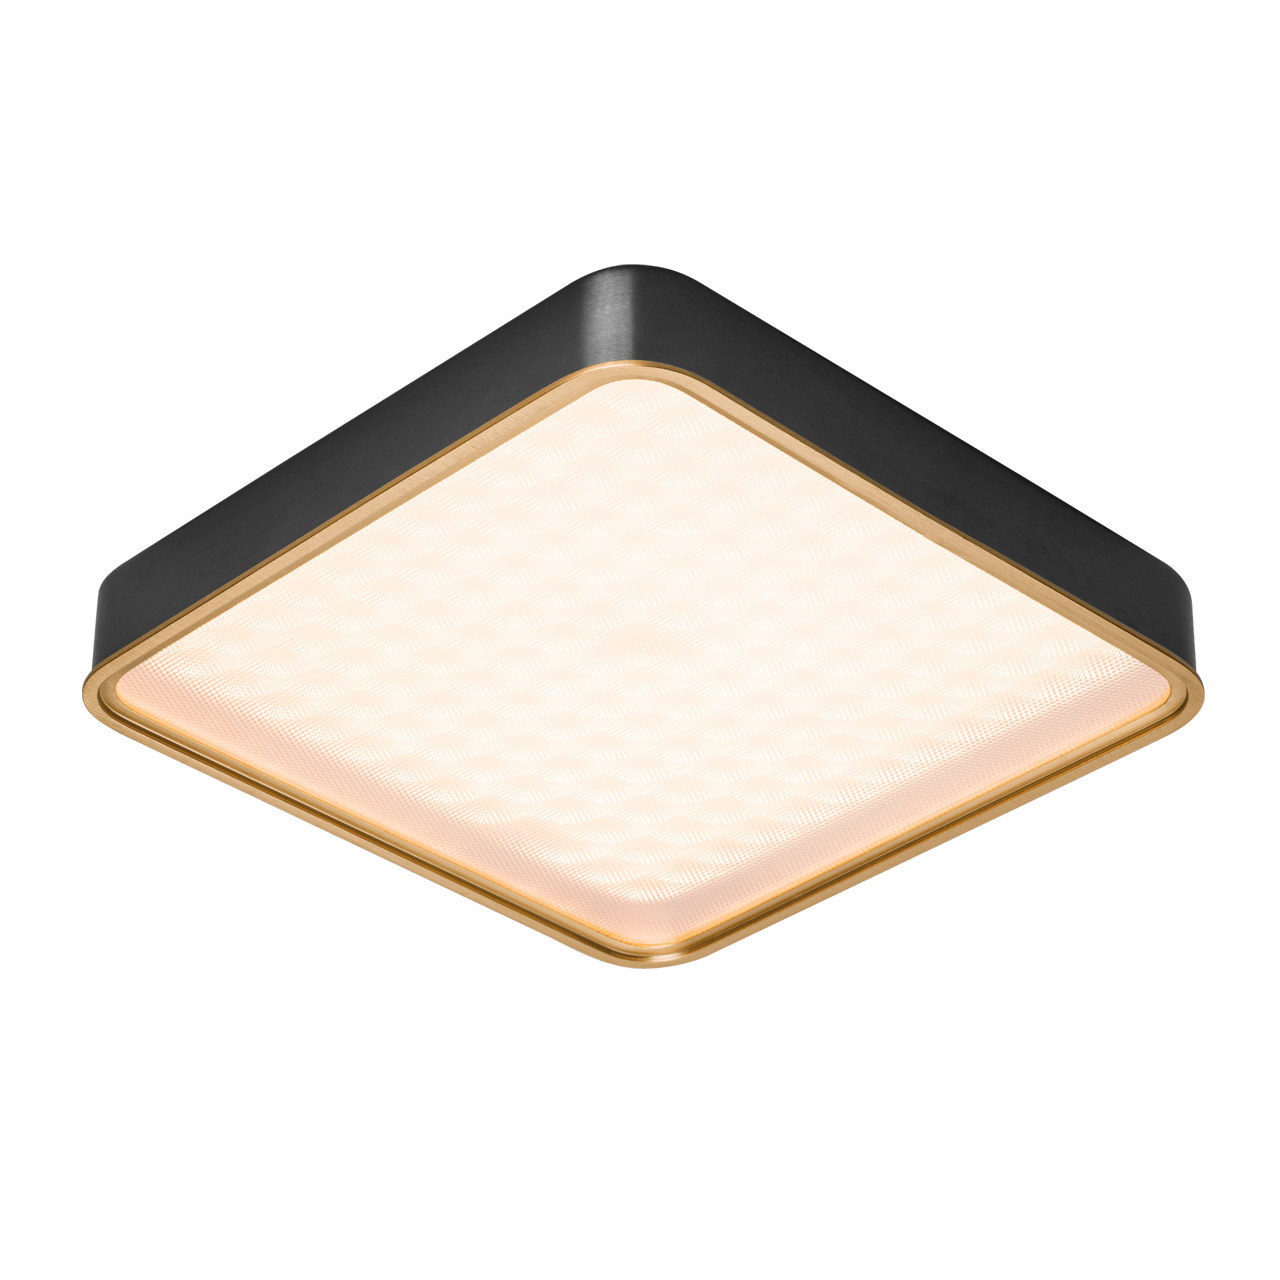 Pageone - Pan (Square M) 12". Ceiling. Flush Mount - Hbdepot